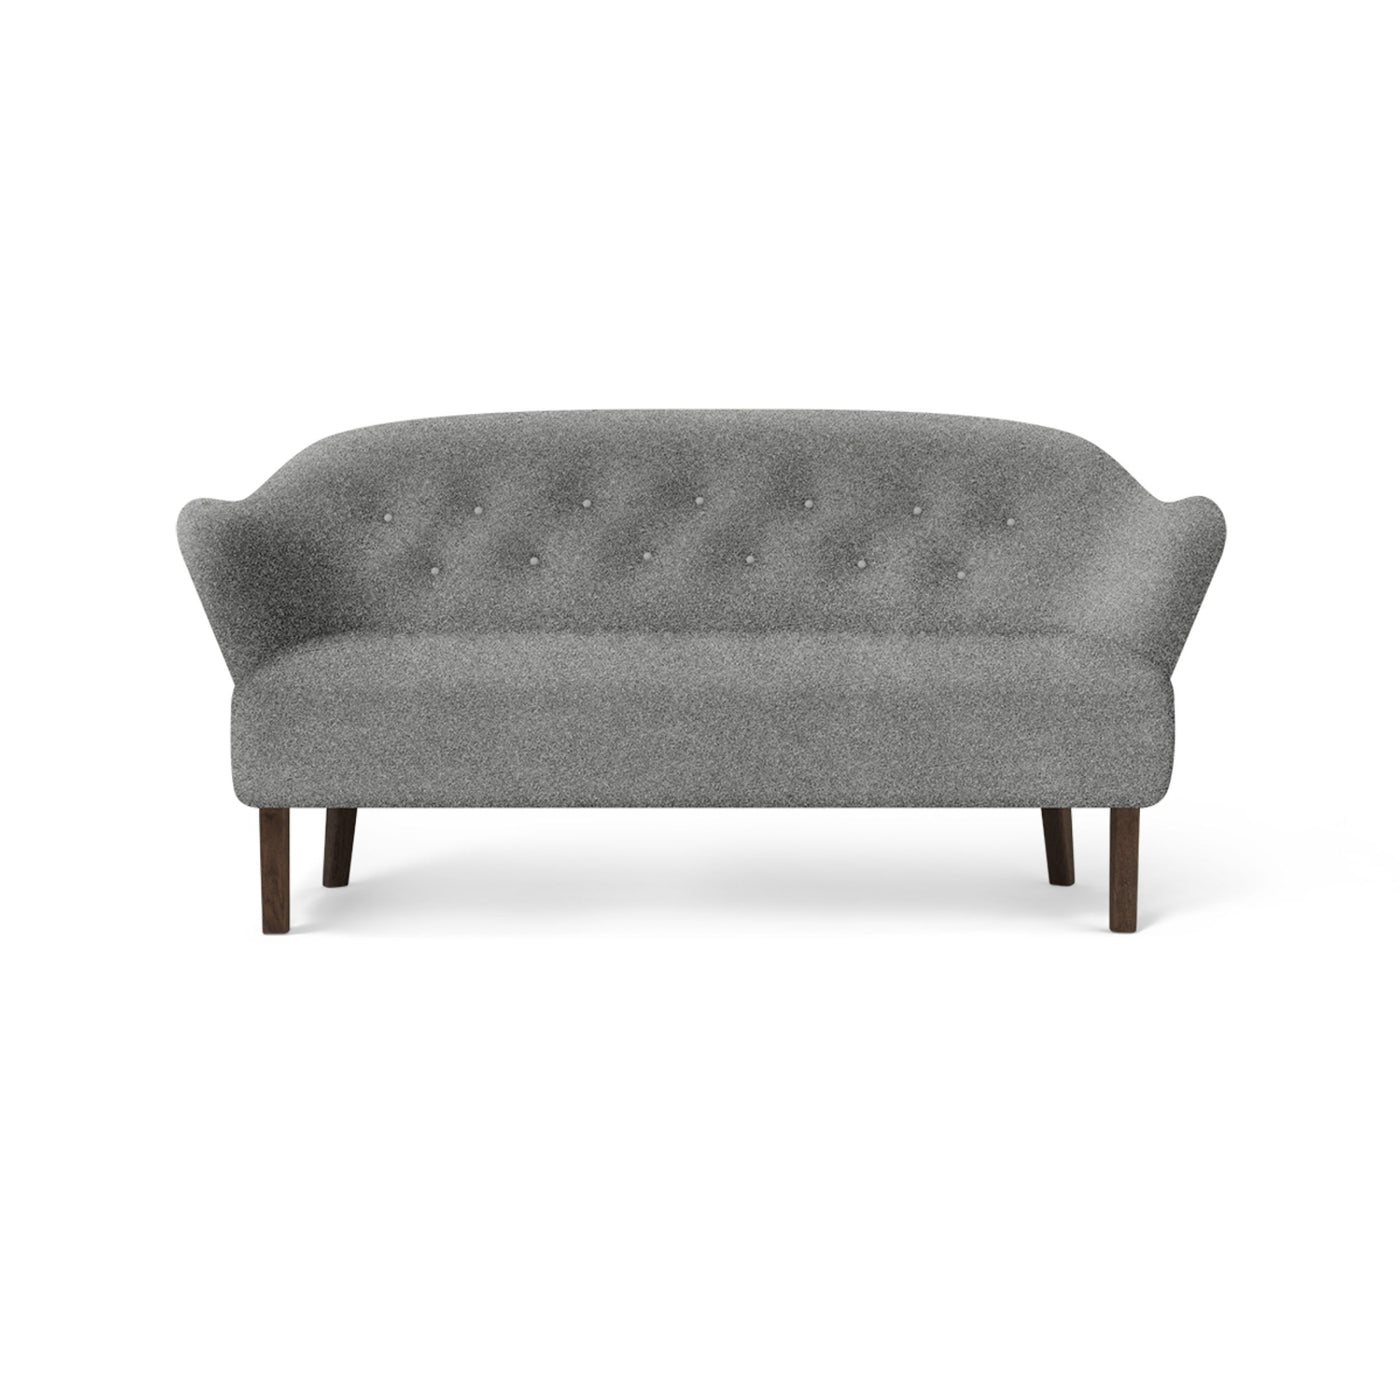 By Lassen Ingeborg sofa with smoked oak legs. Made to order from someday designs. #colour_sahco-nara-1